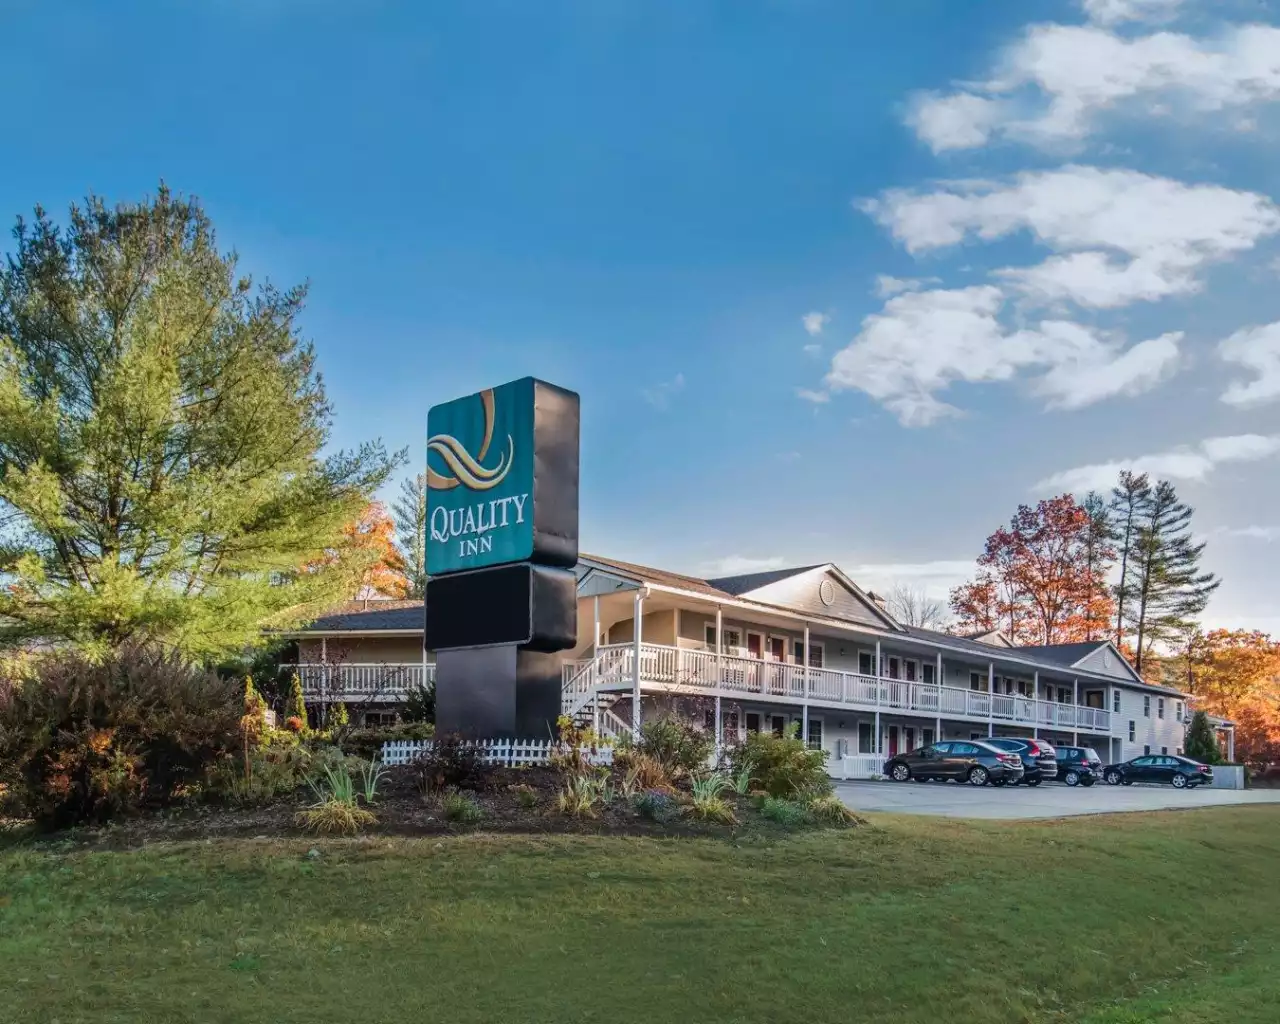 Quality Inn at Quechee Gorge - Fall Exterior with Sign